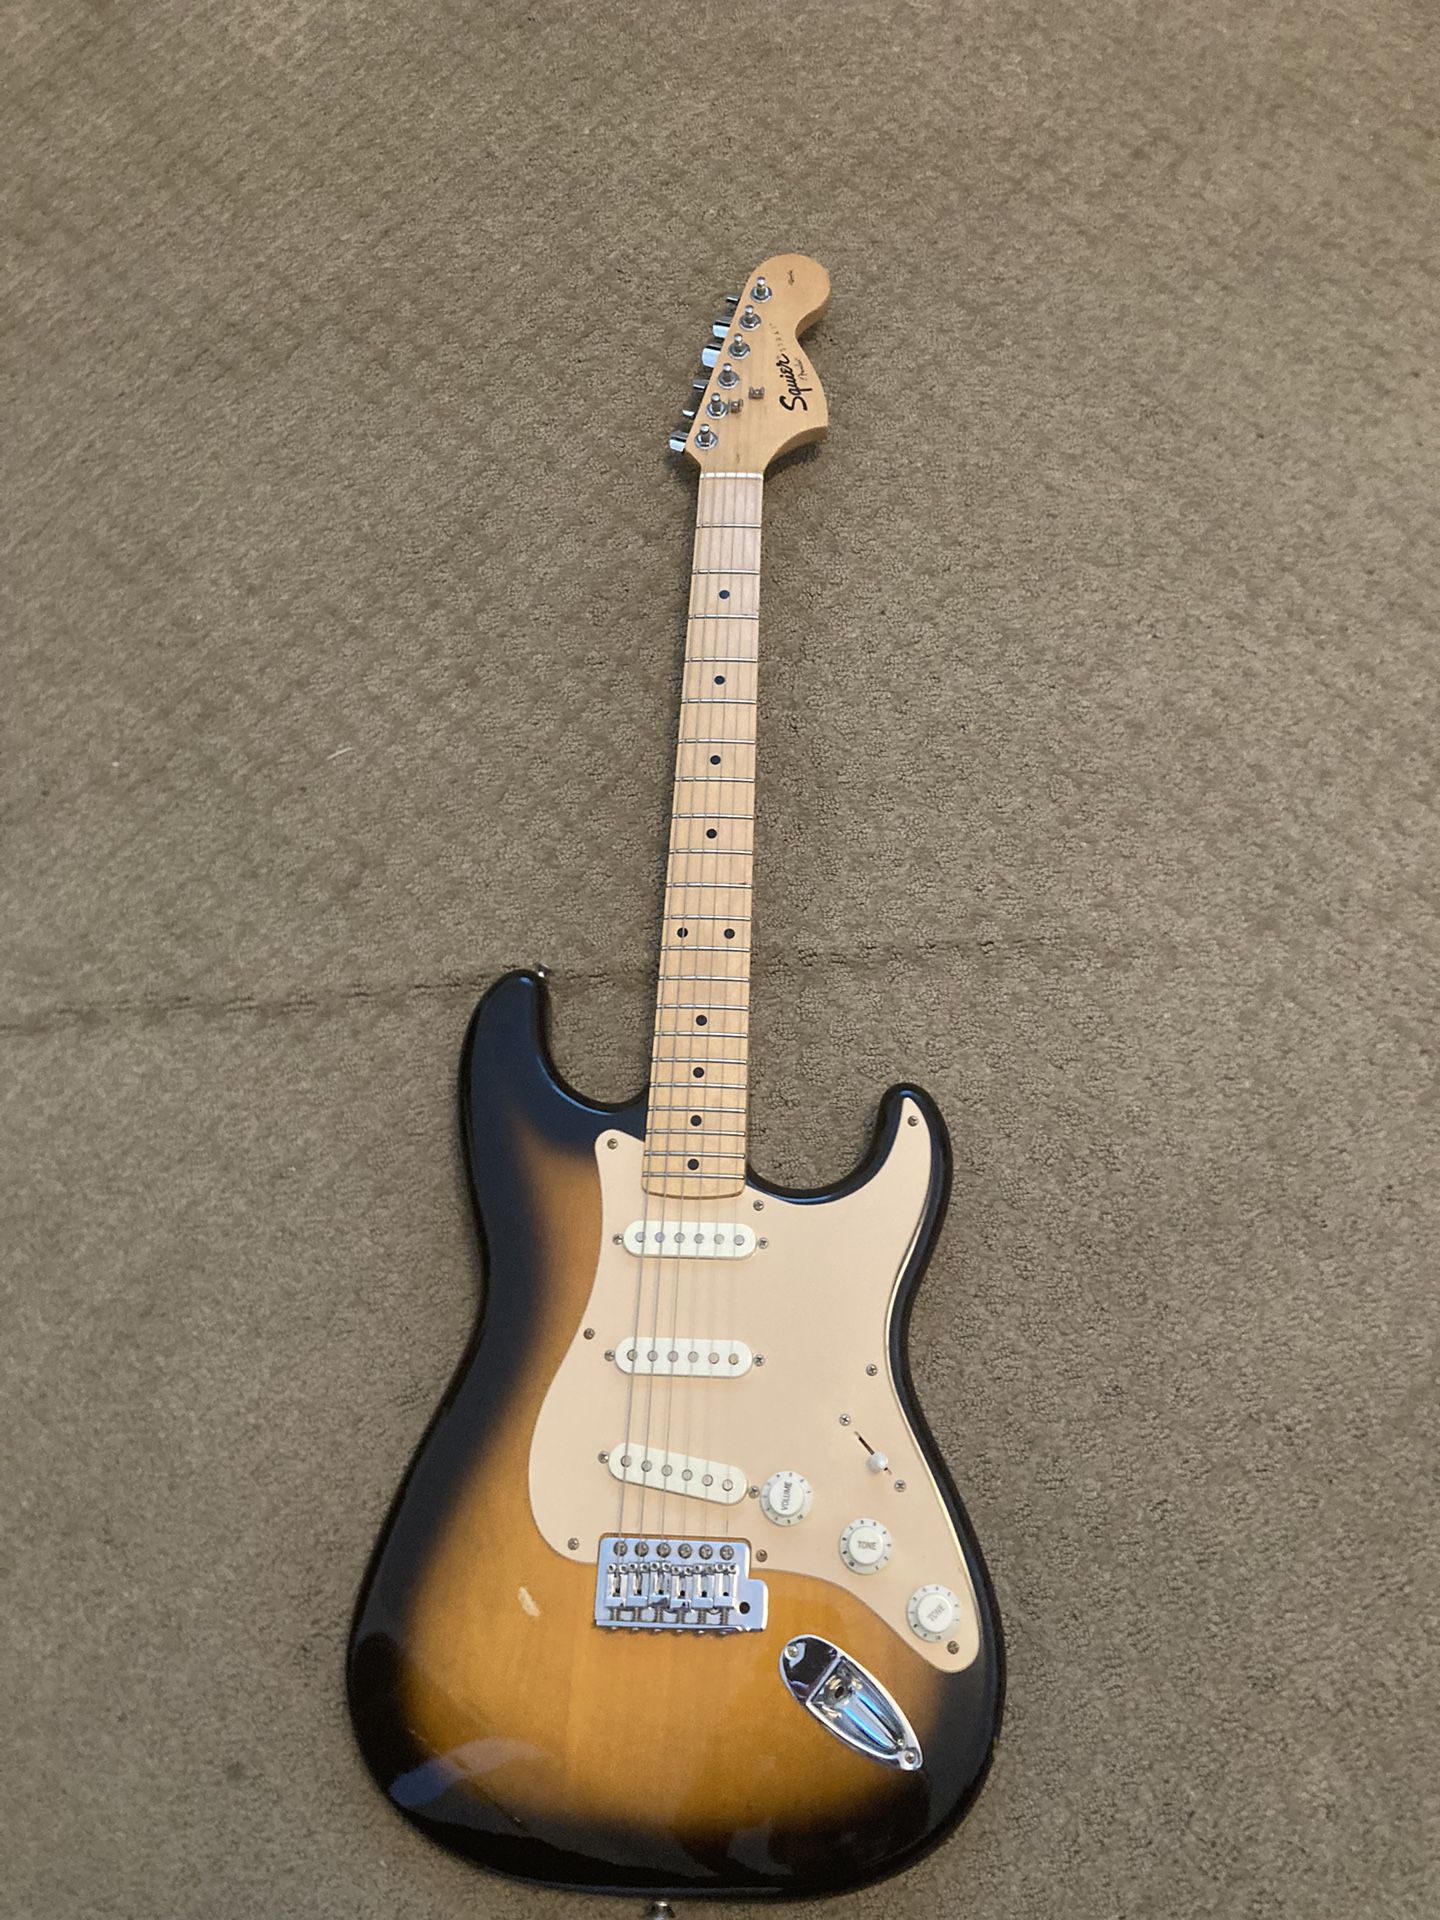 Electric Guitar (Squire Stratocaster) 